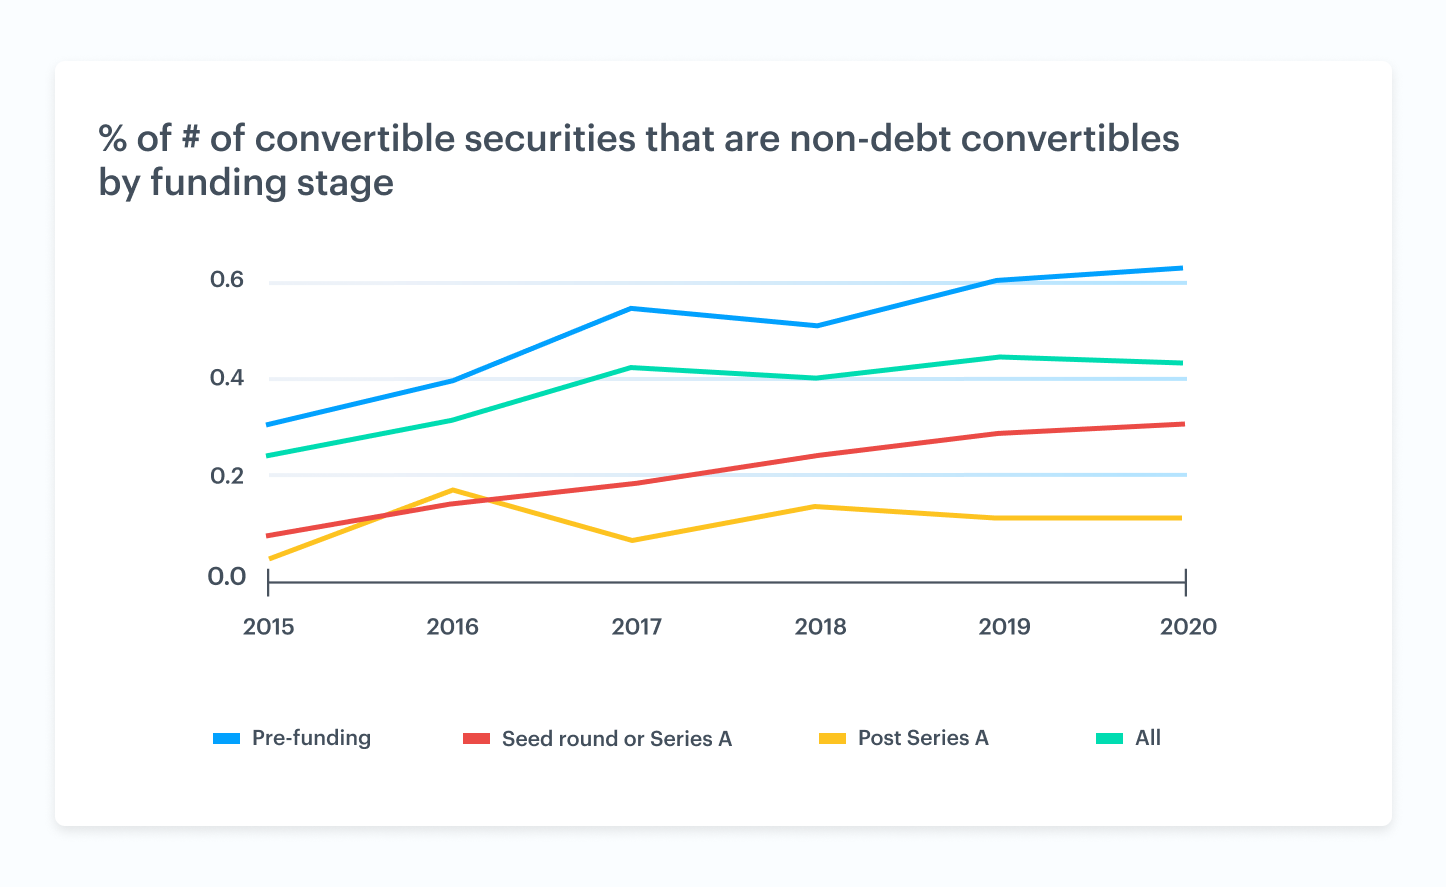 % of # of convertible securities that are non-debt convertible securities by funding stage